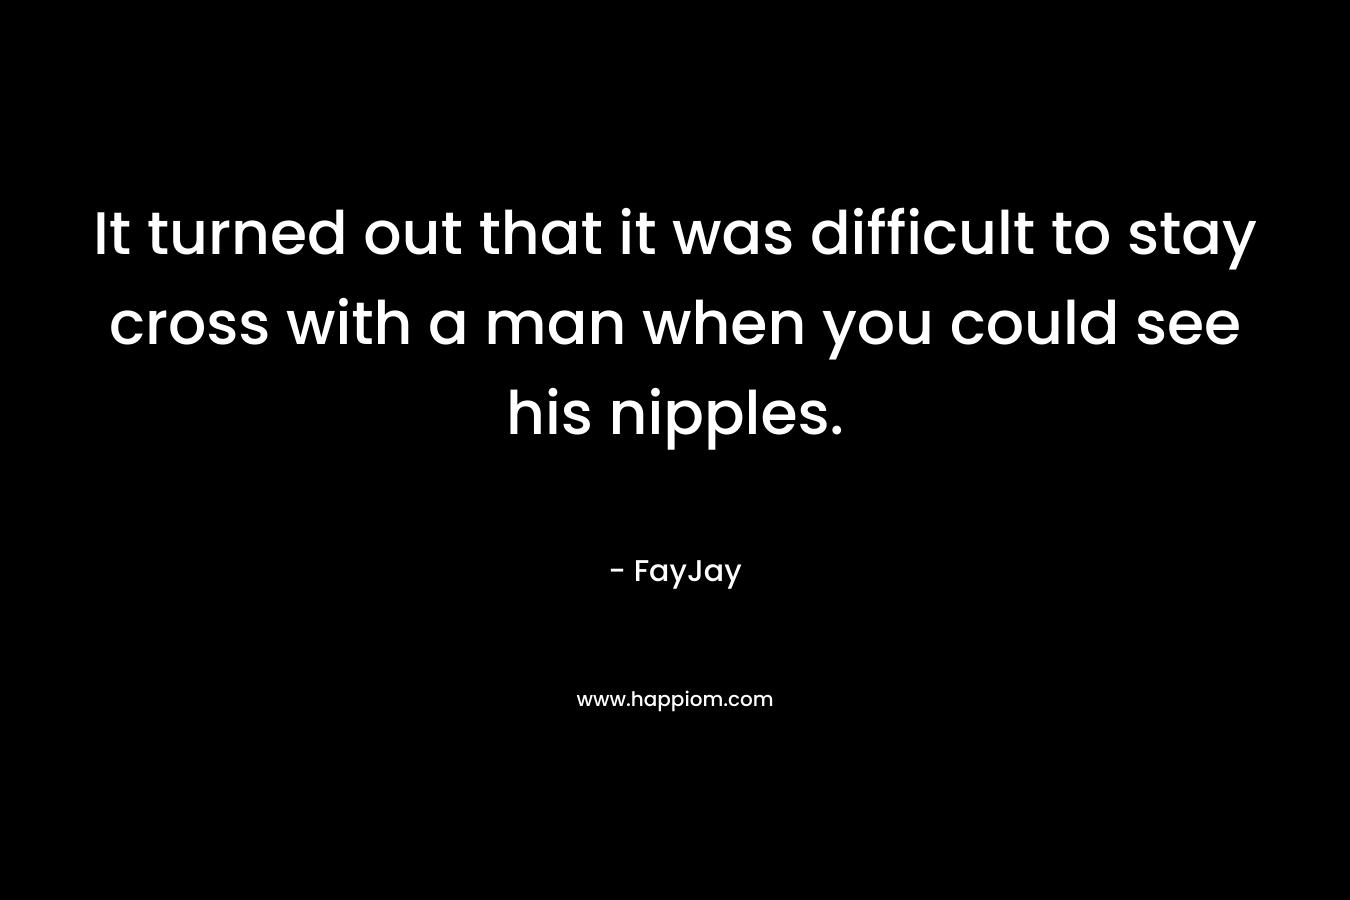 It turned out that it was difficult to stay cross with a man when you could see his nipples. – FayJay